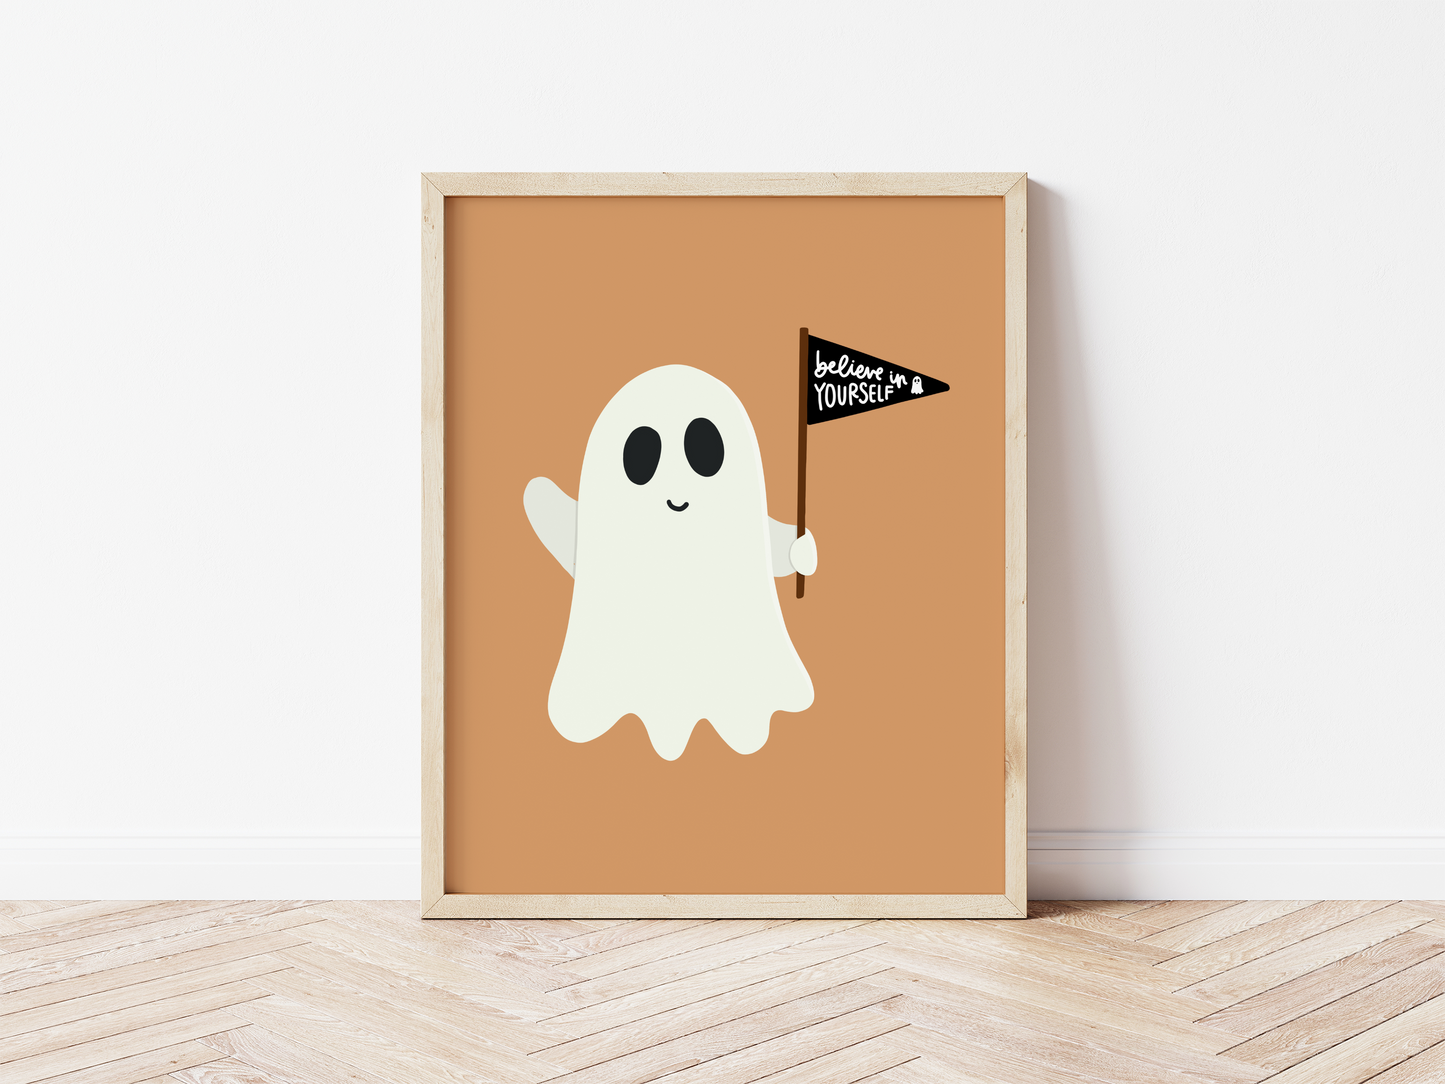 Believe In Yourself Ghost Print